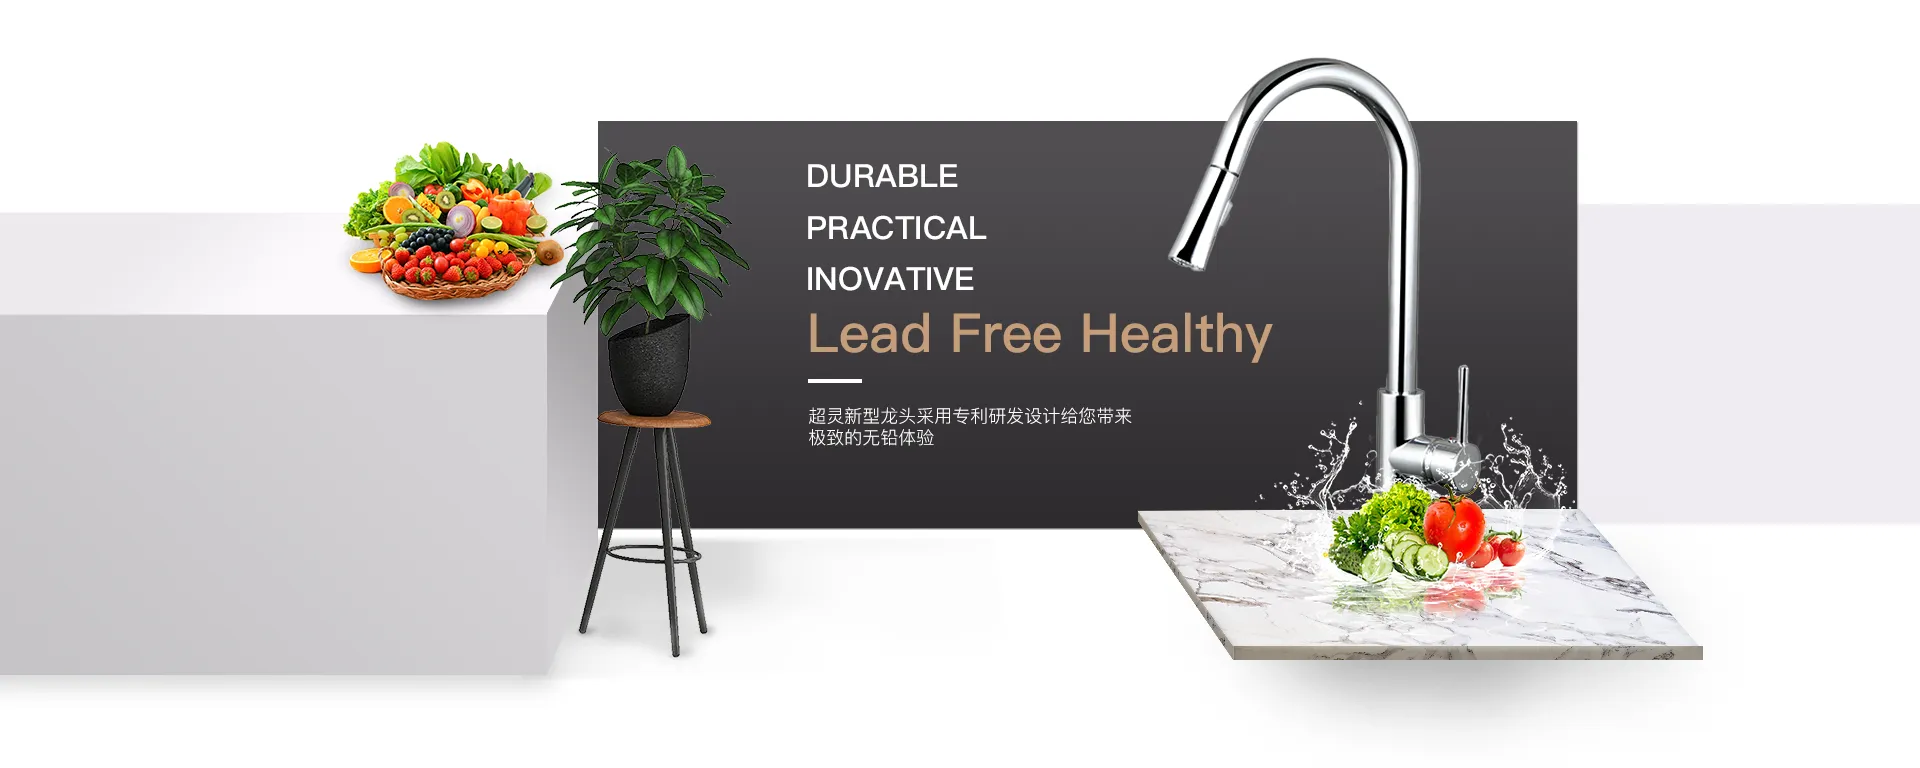 lead free faucet